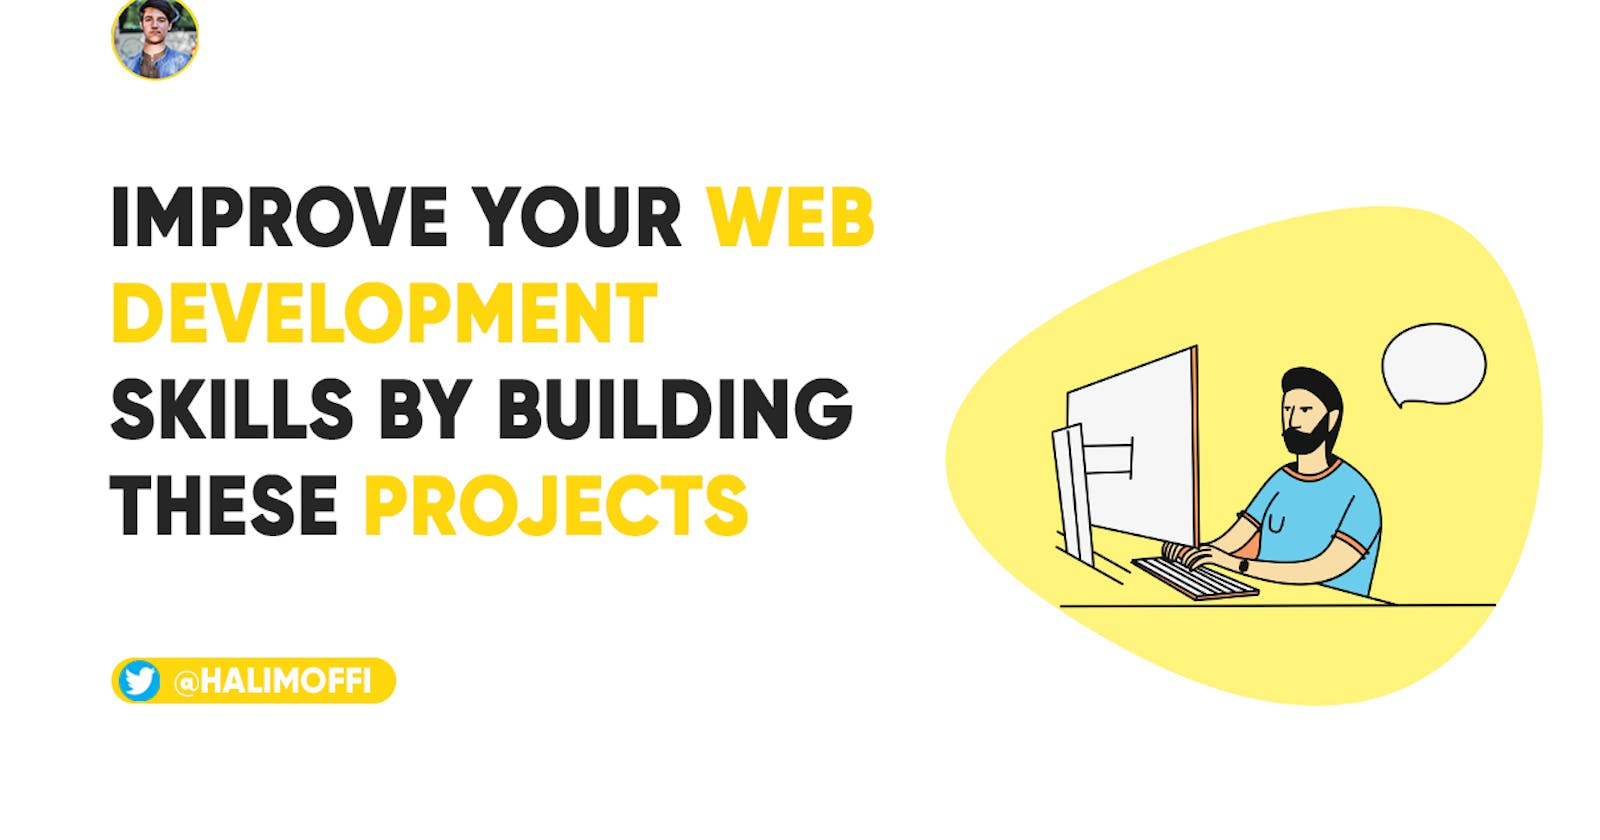 Improve Your Web Development Skills by Building these Beginner-friendly Projects